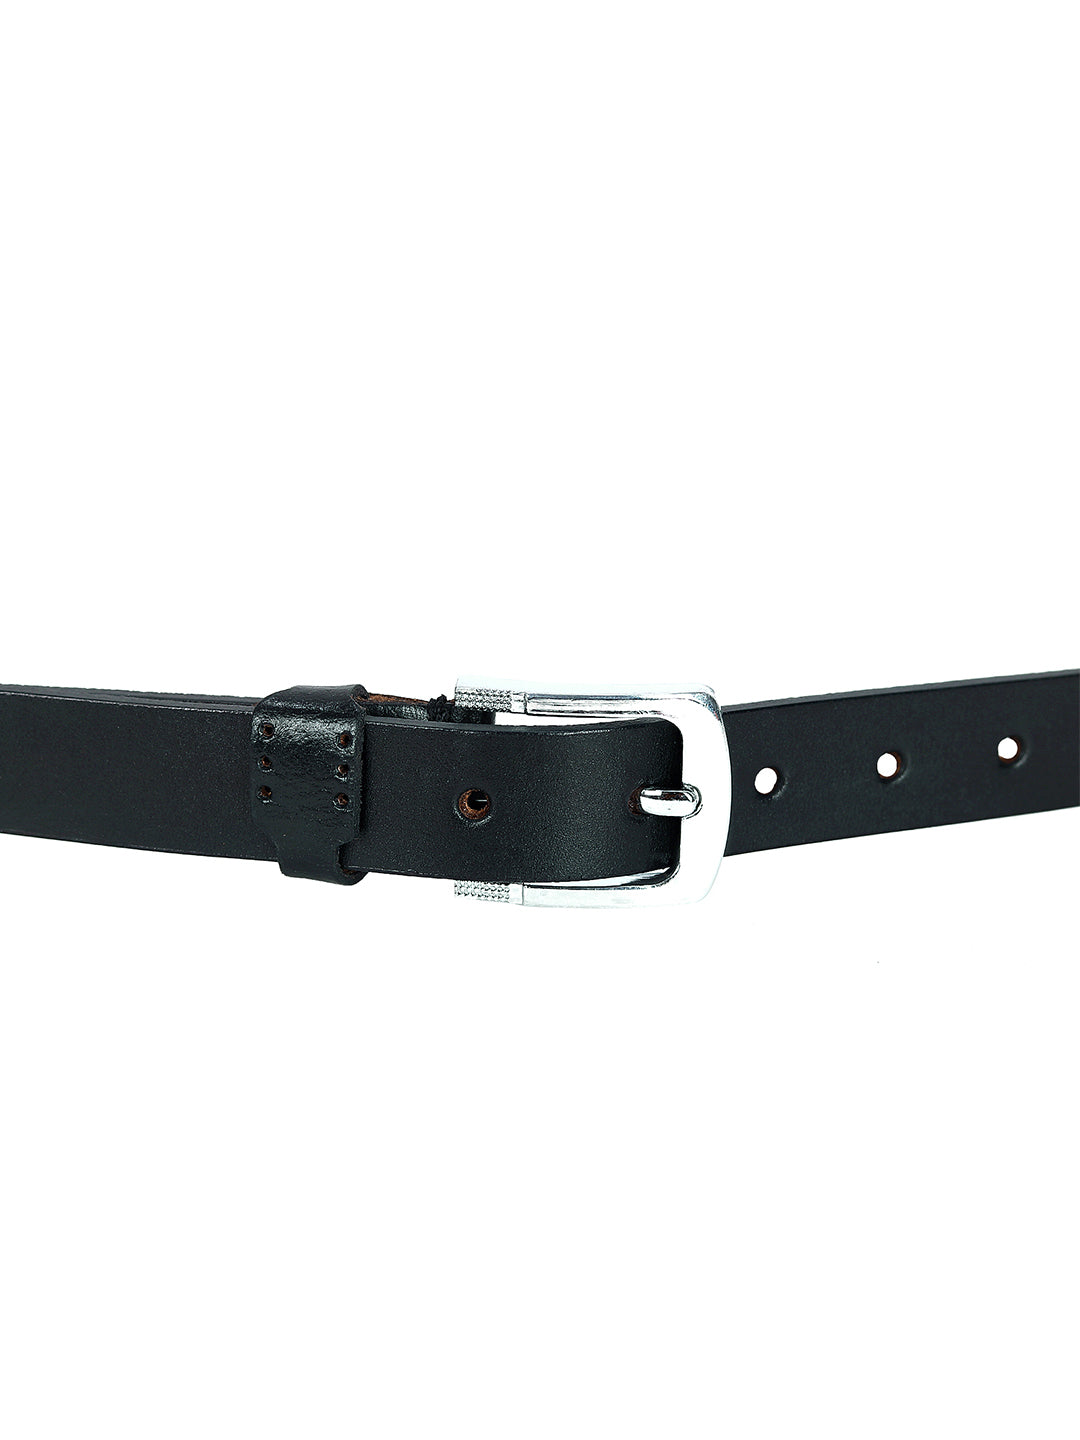 Women Casual, Evening, Party, Formal Black Genuine Leather Belt